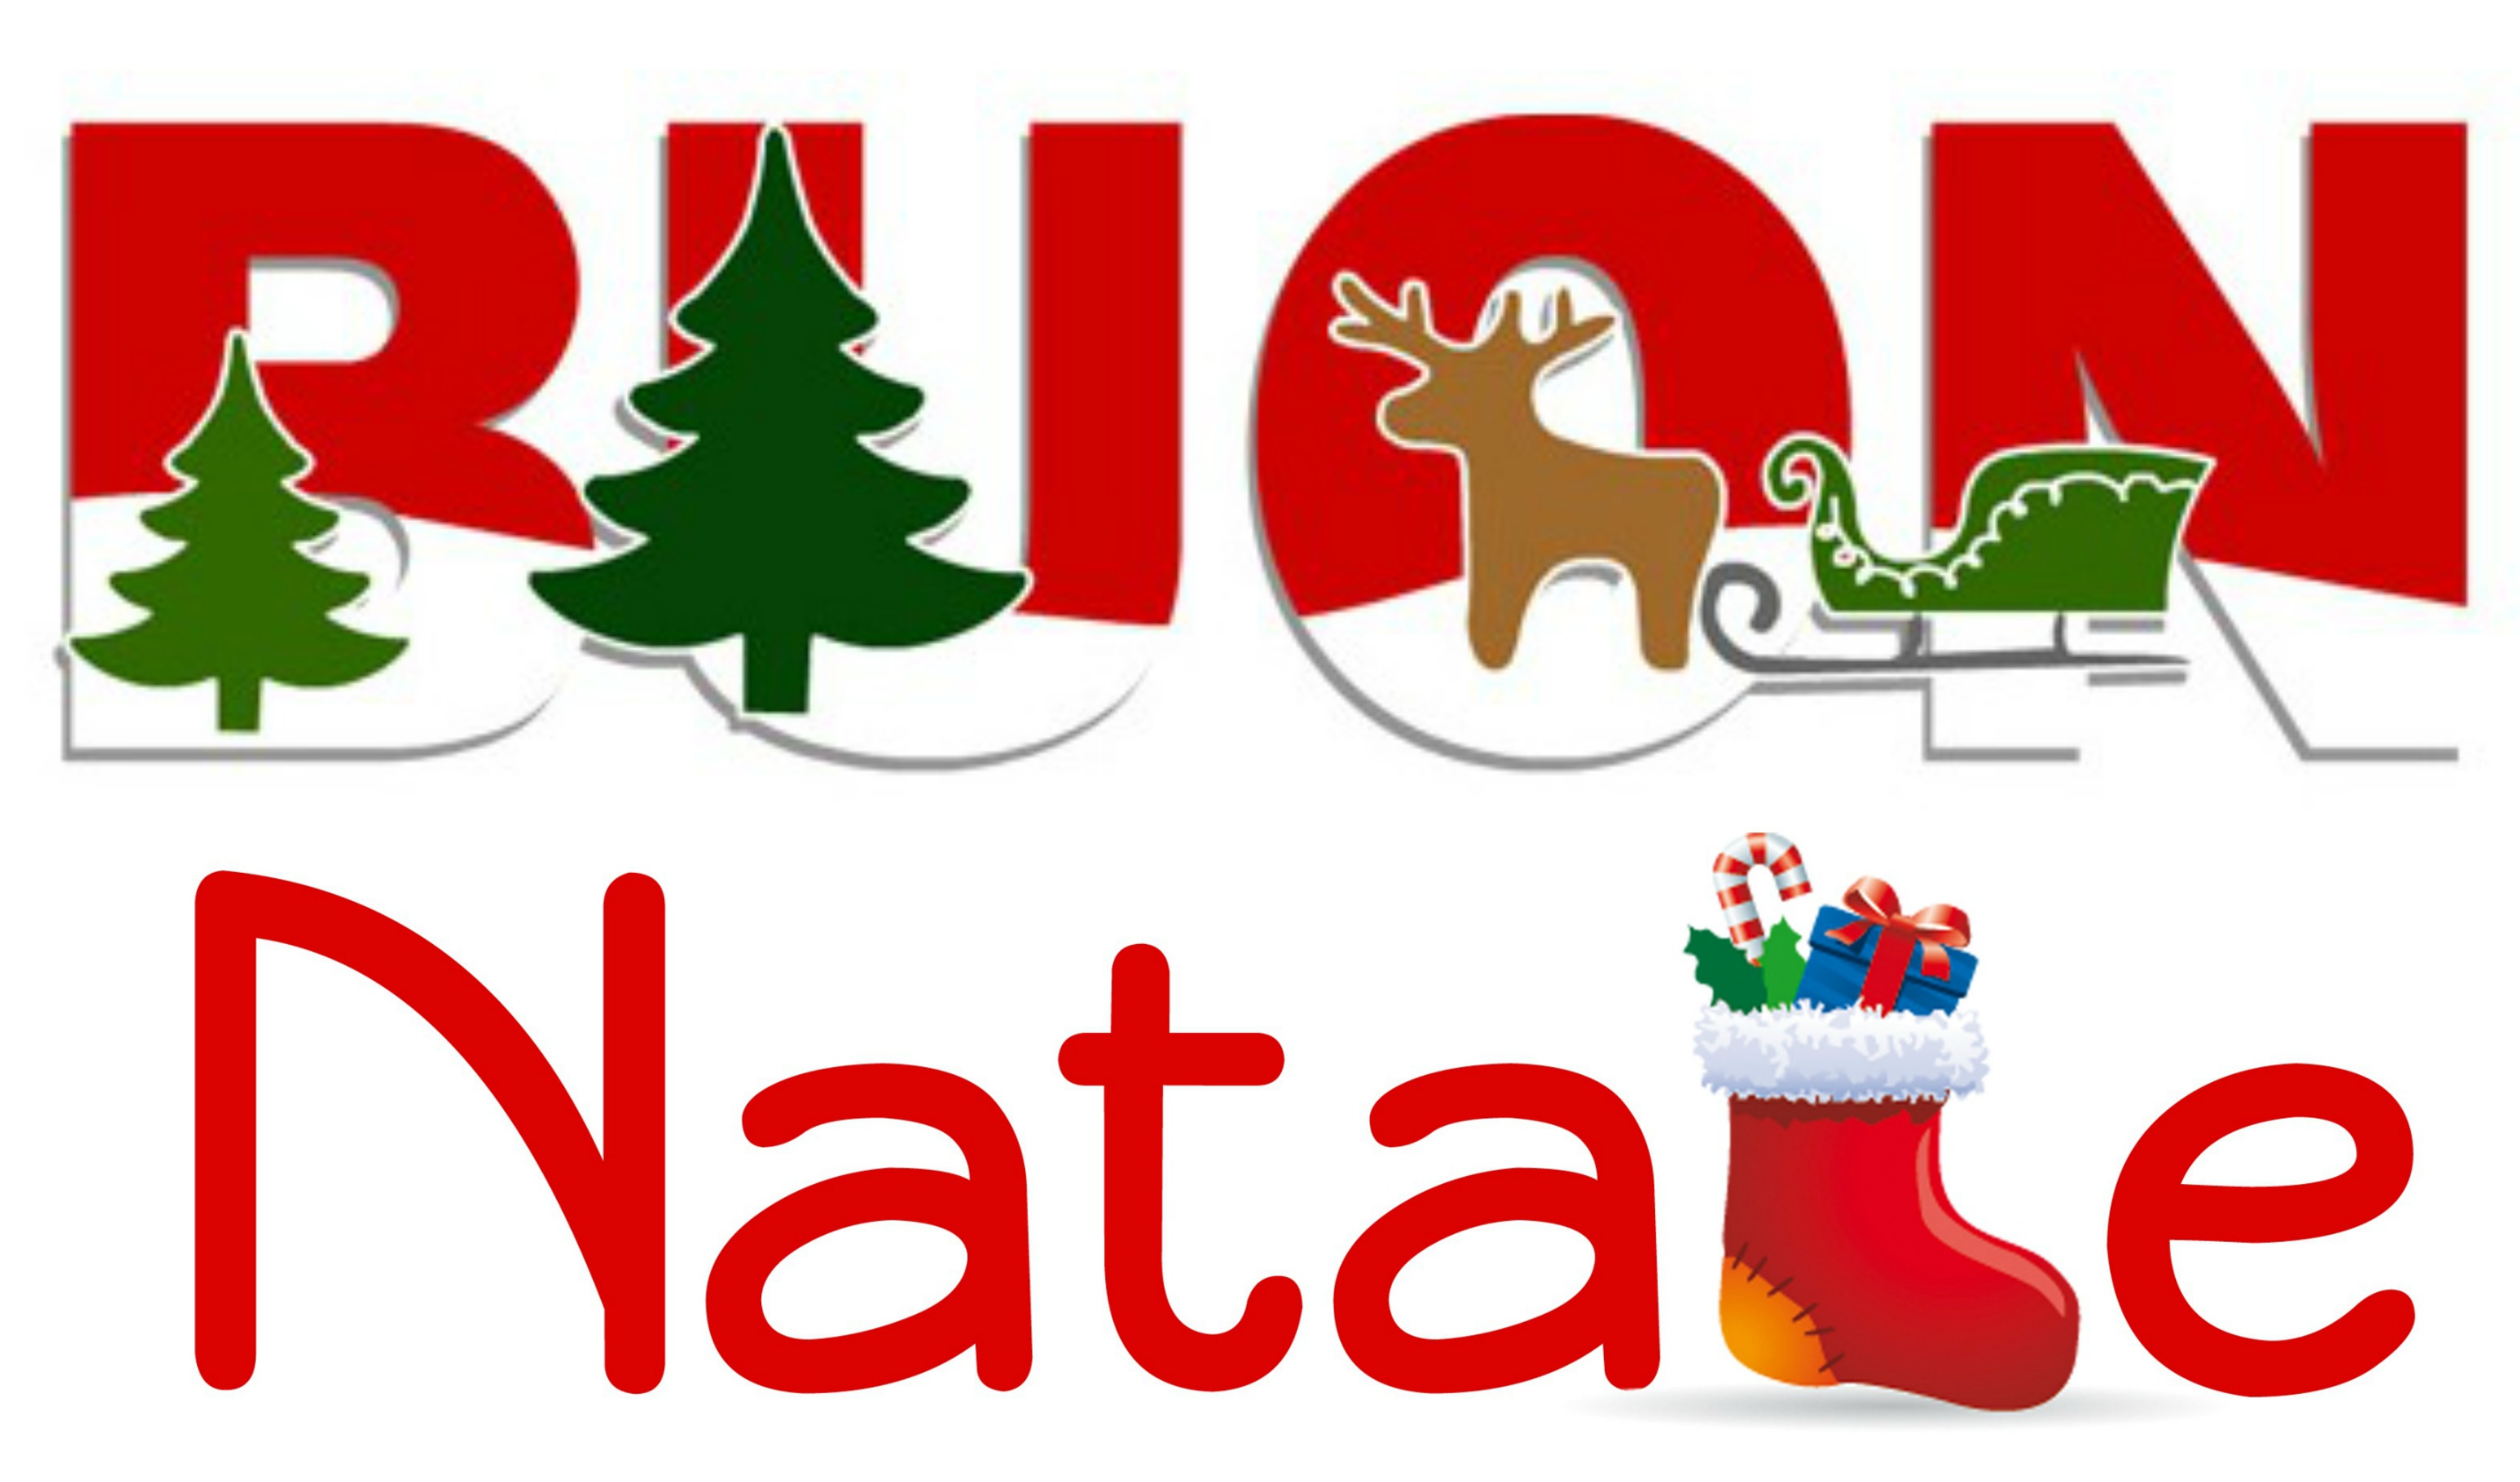 Buon Natale Song In Italian.Buon Natale Smile Laugh Travel Love Be Yourself Enjoy Life